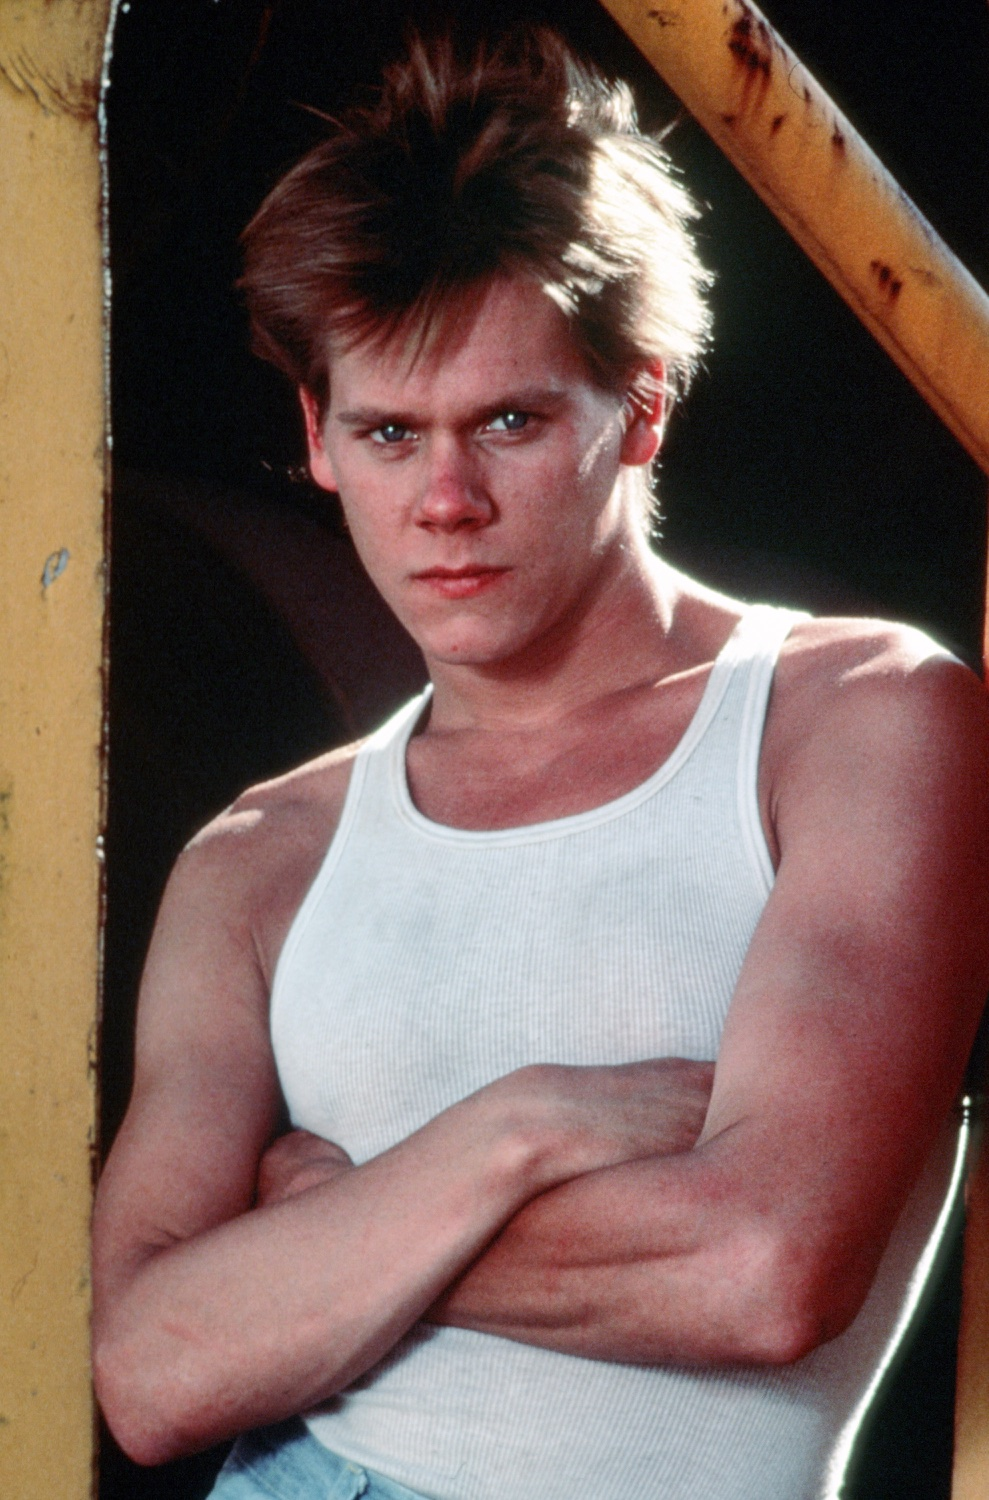 Kevin Bacon’s character from  the movie ‘Footloose’